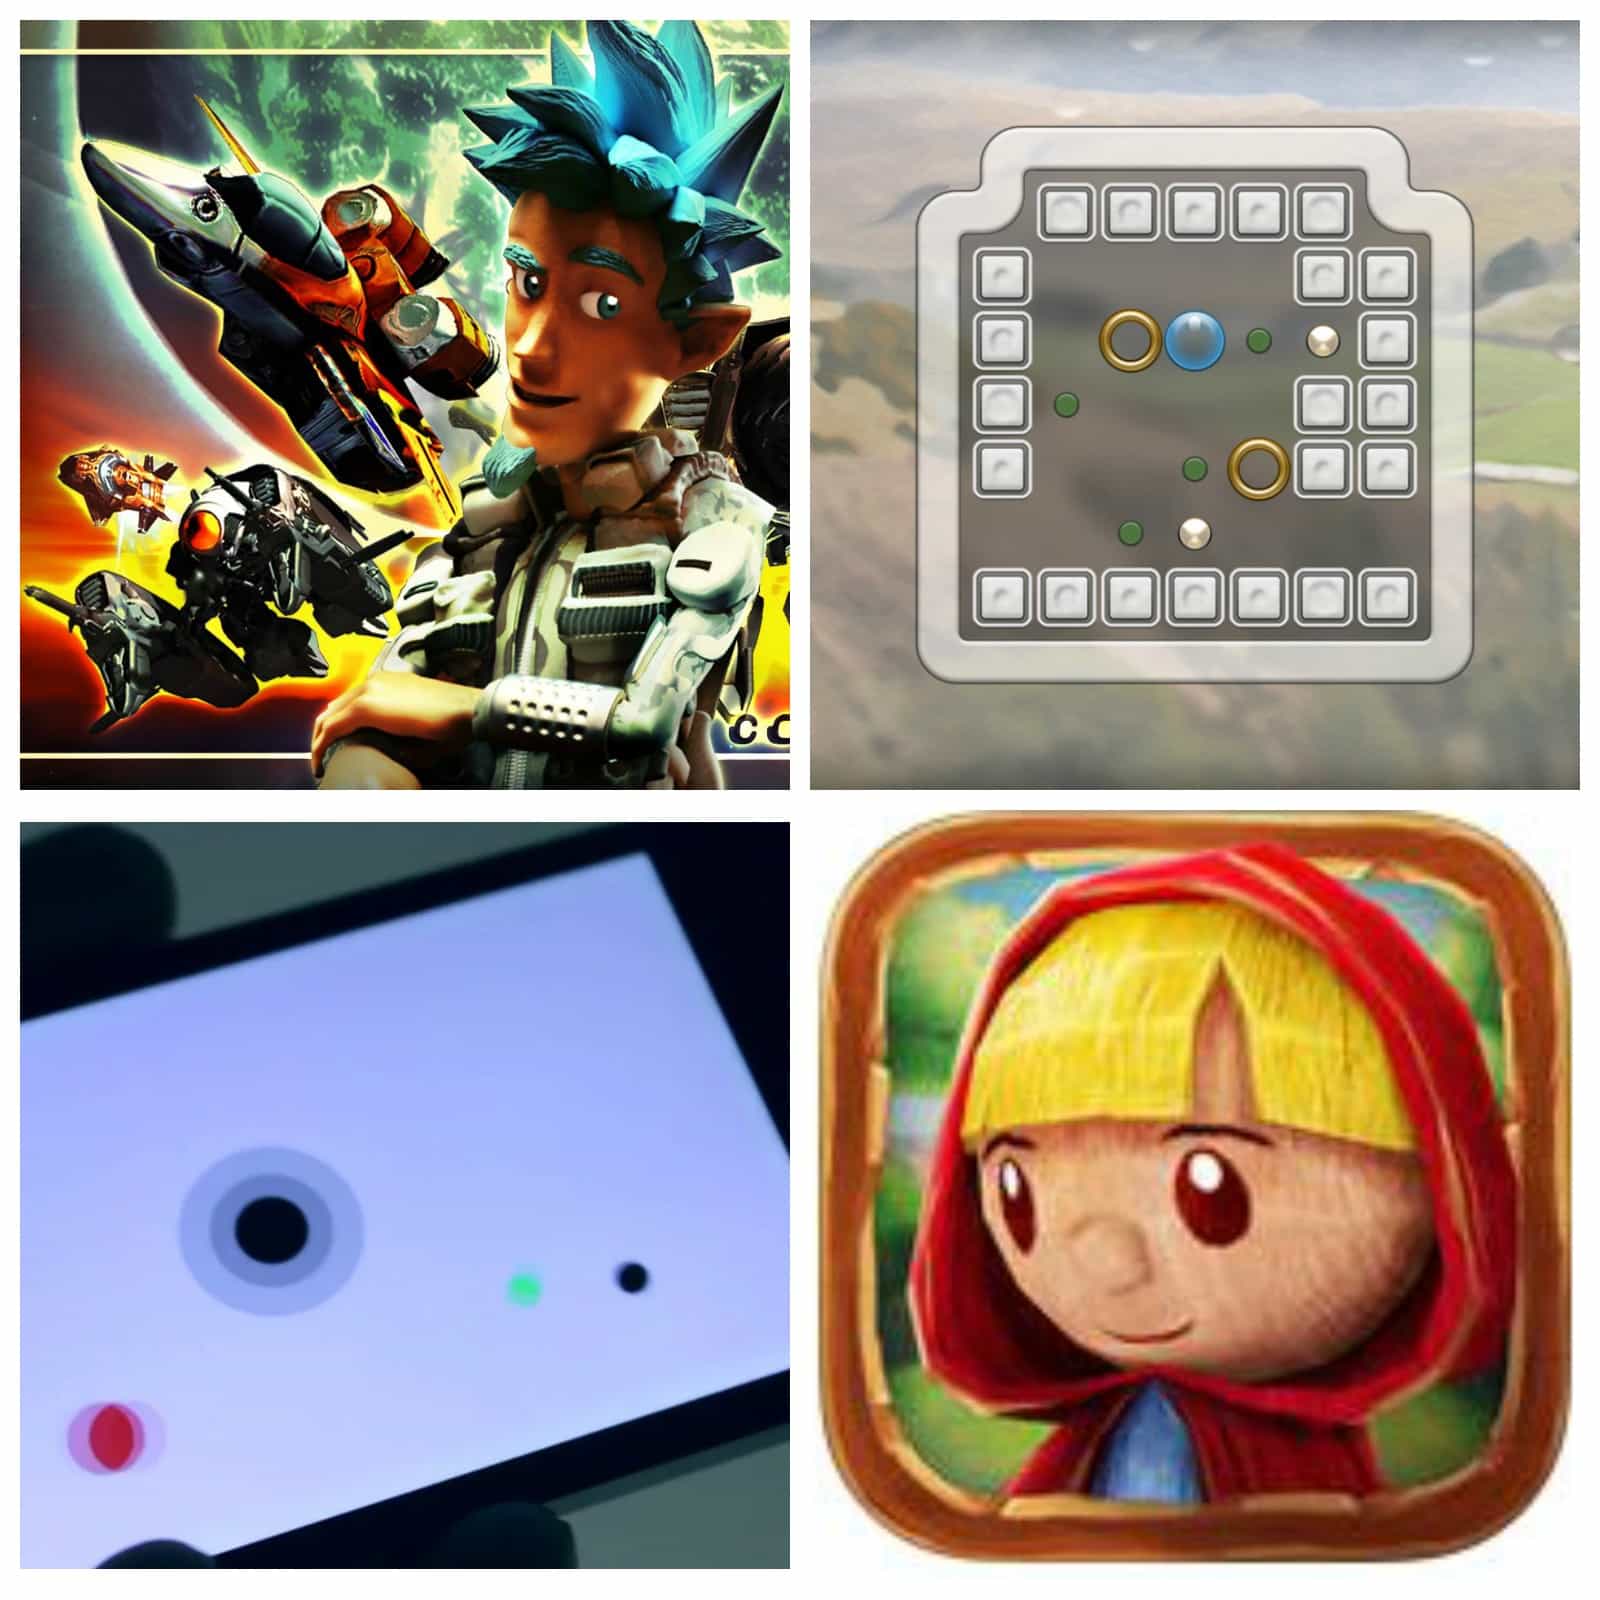 Grab these free iOS games before the prices go up!